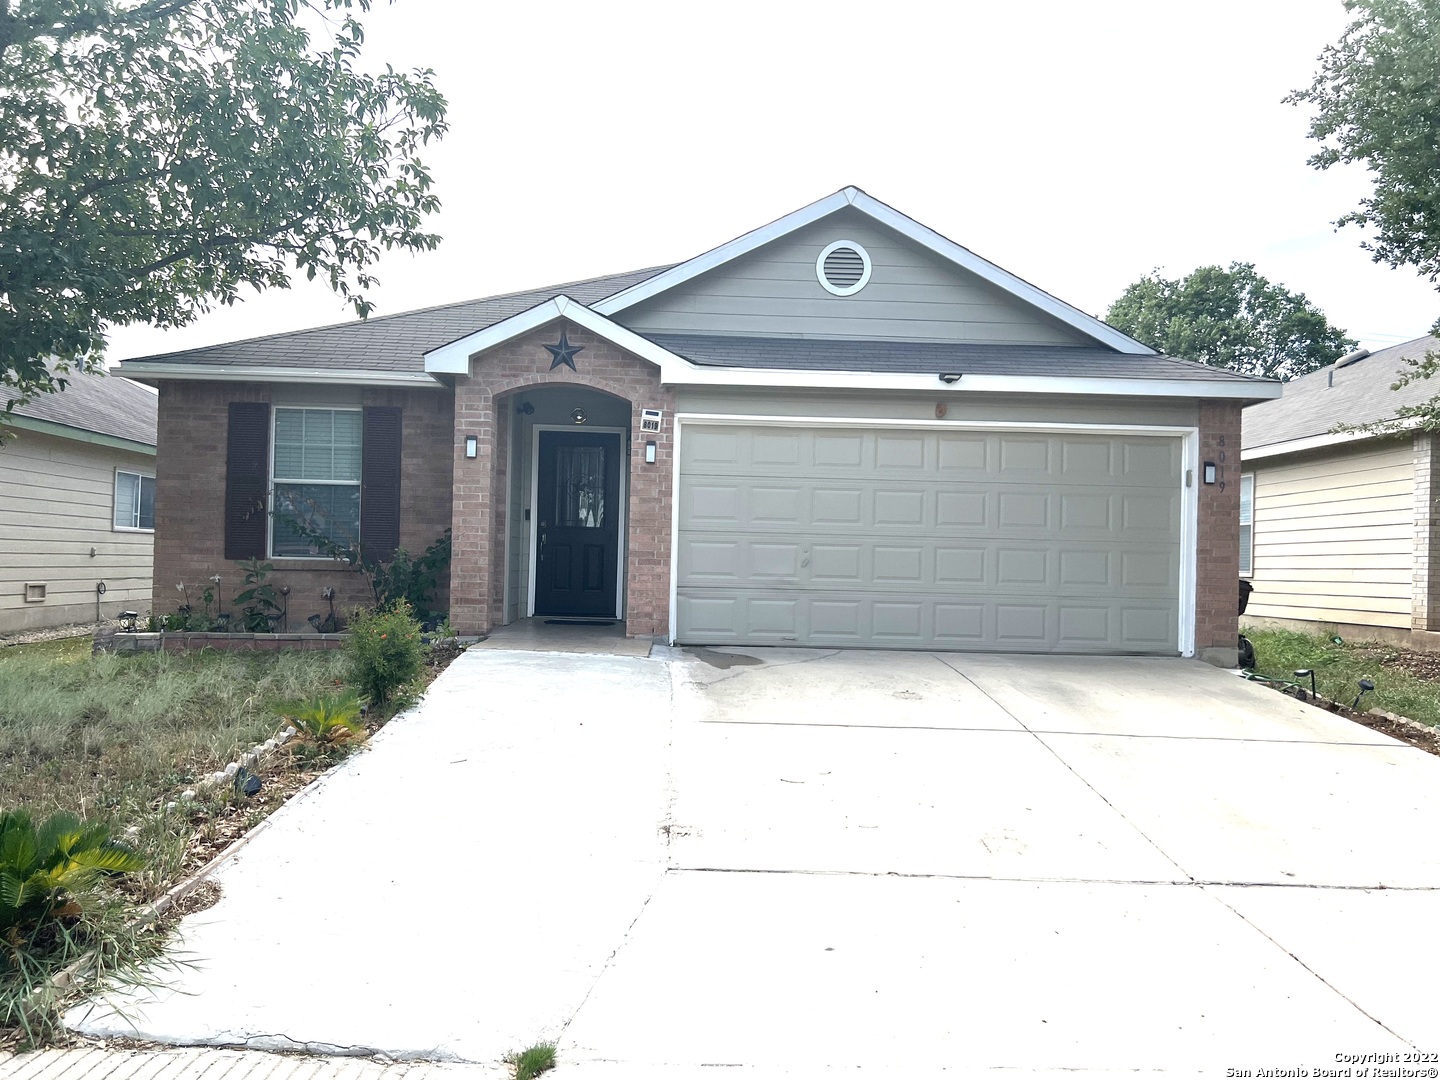 Cute one story home in the Silver Oaks subdivision, near the shoppings, Sea World, Fiesta Texas.  House opens floor plan with 3 beds, 2 baths and the office.  Ceramic tile through out the house, big patio with partial cover for family retreat. Few fruit trees in the back yard.